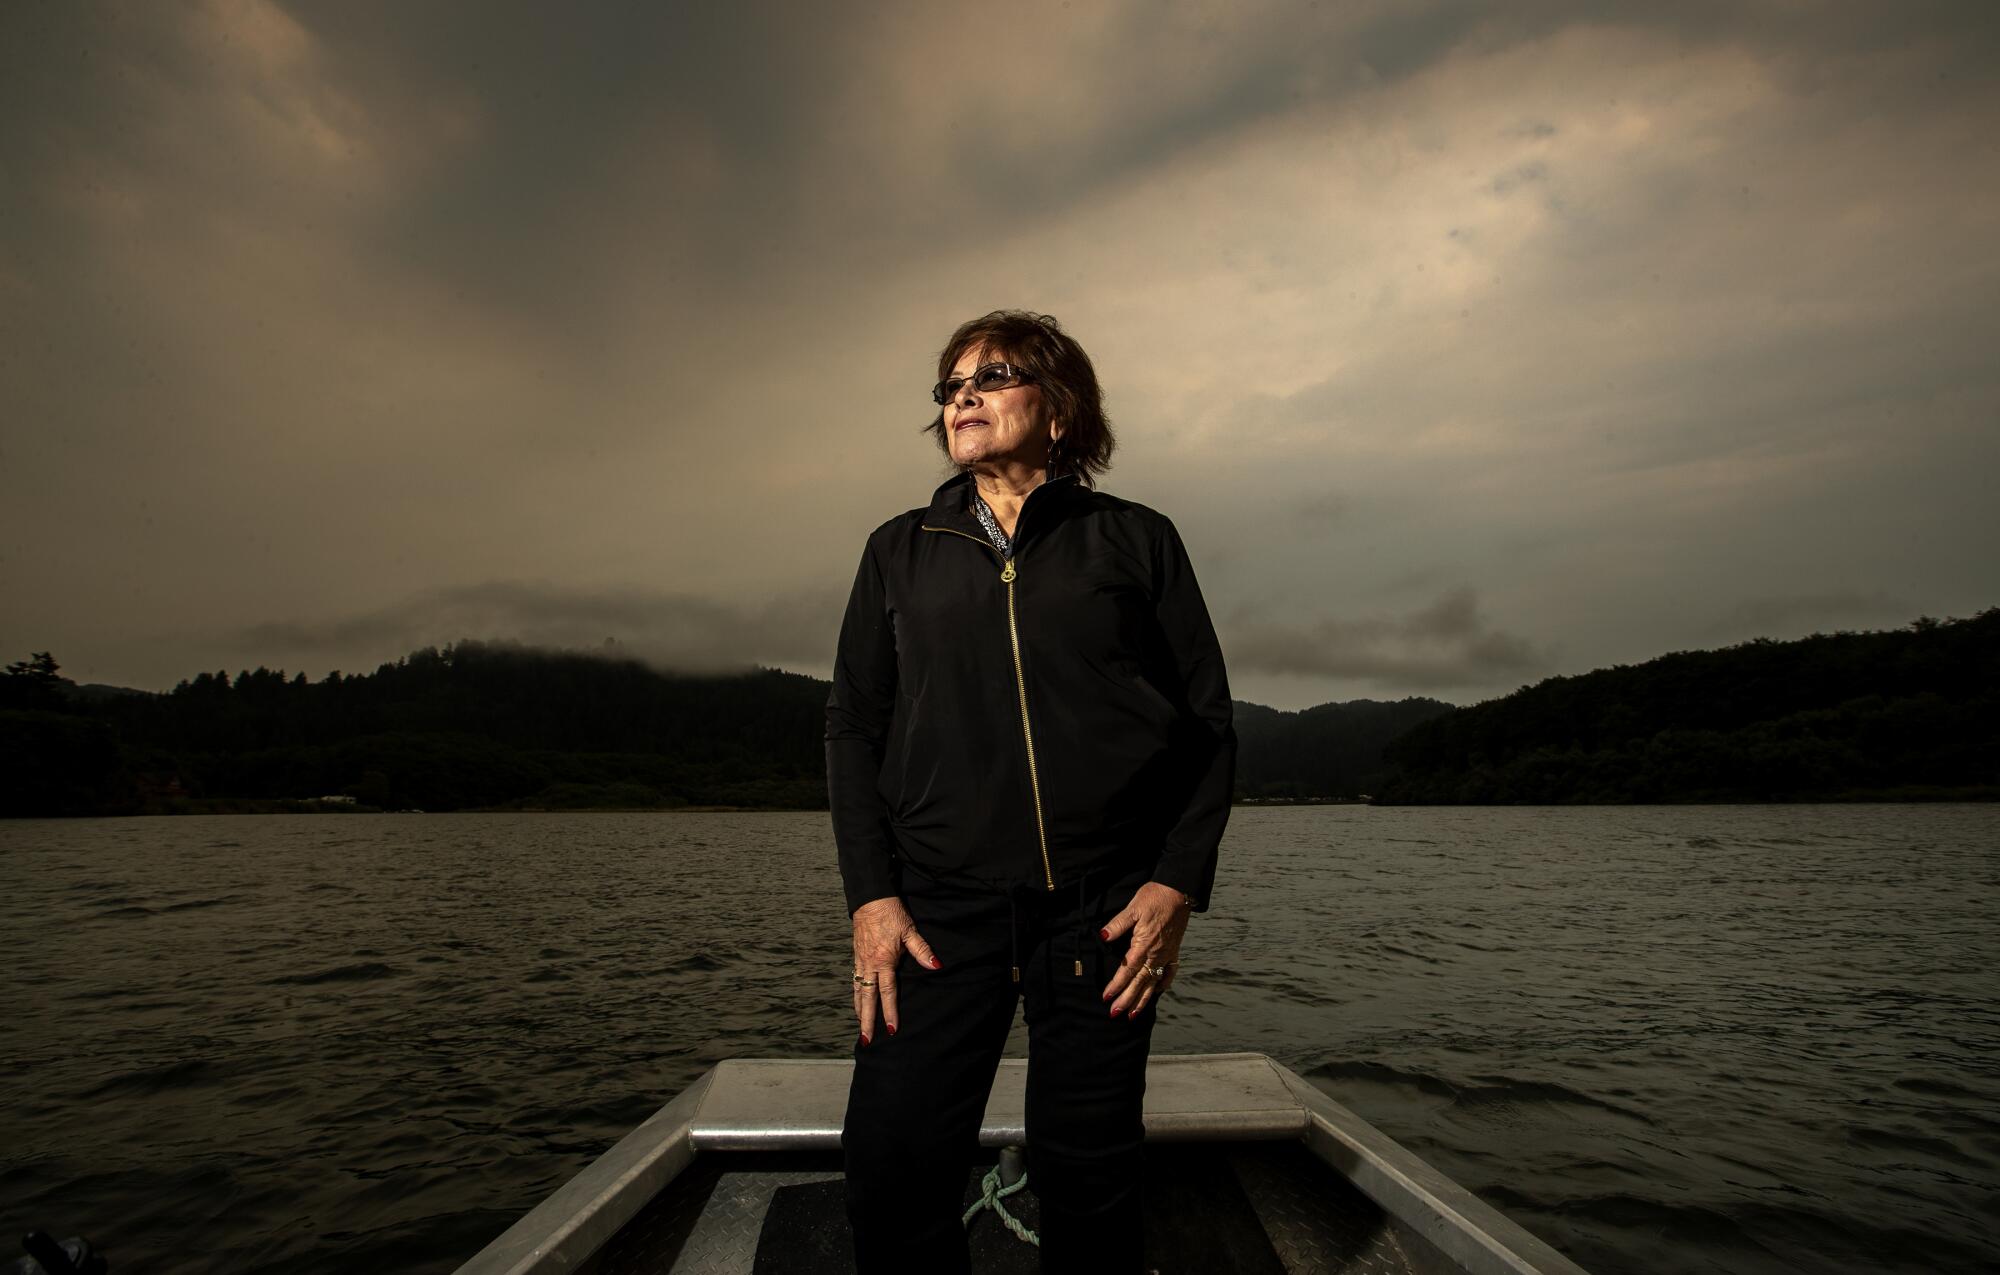 A woman stands in a boat against a dark sky.